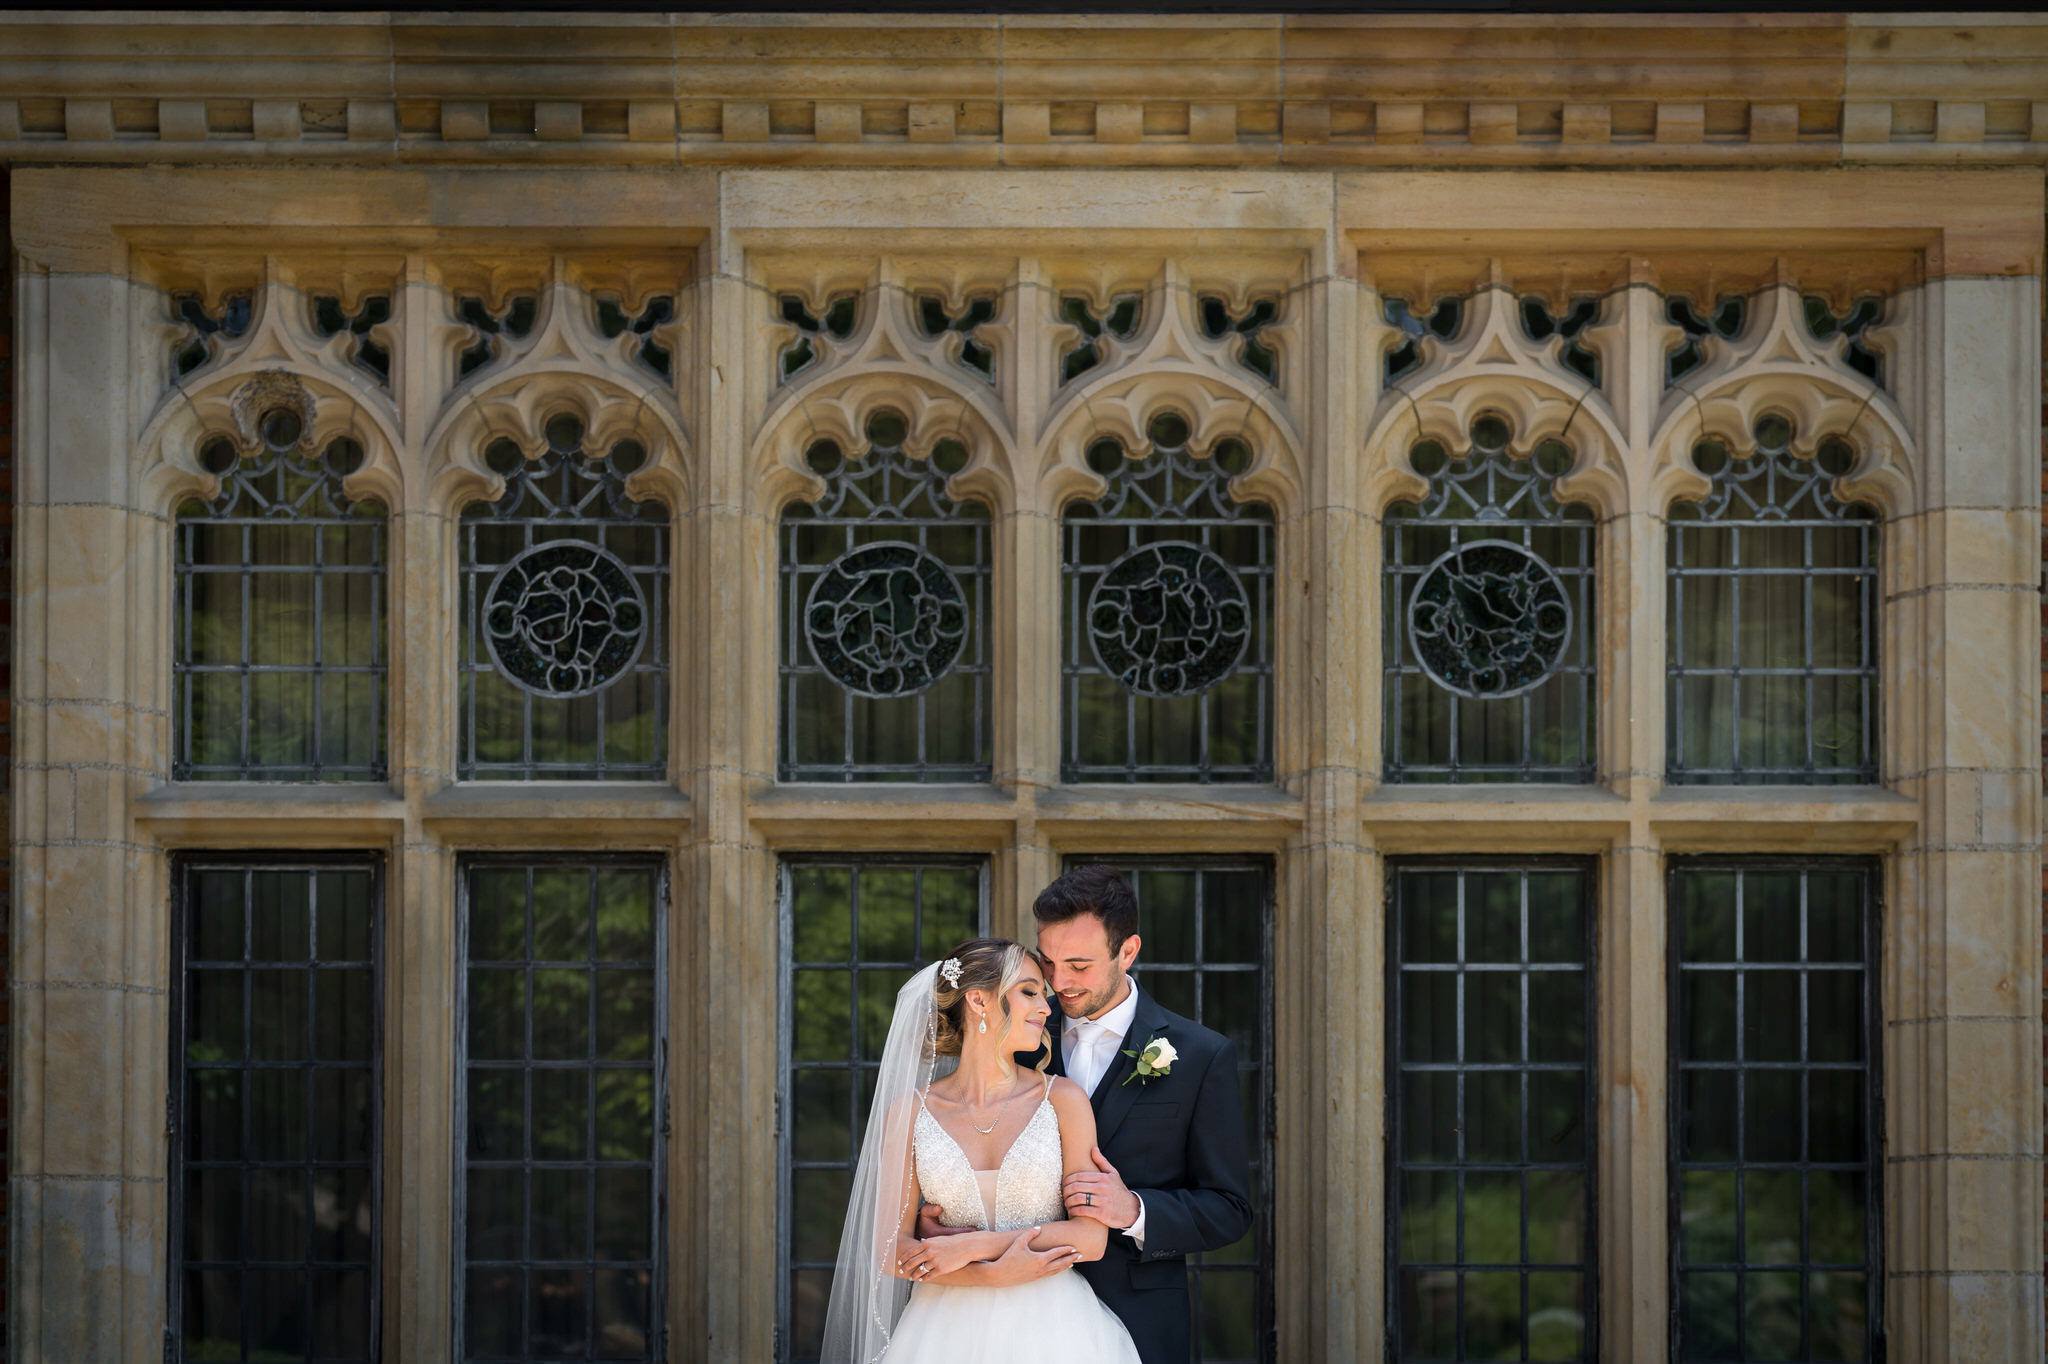 A bride and groom snuggle in front of a wall of windows at their wedding at Meadowbrook Hall.  